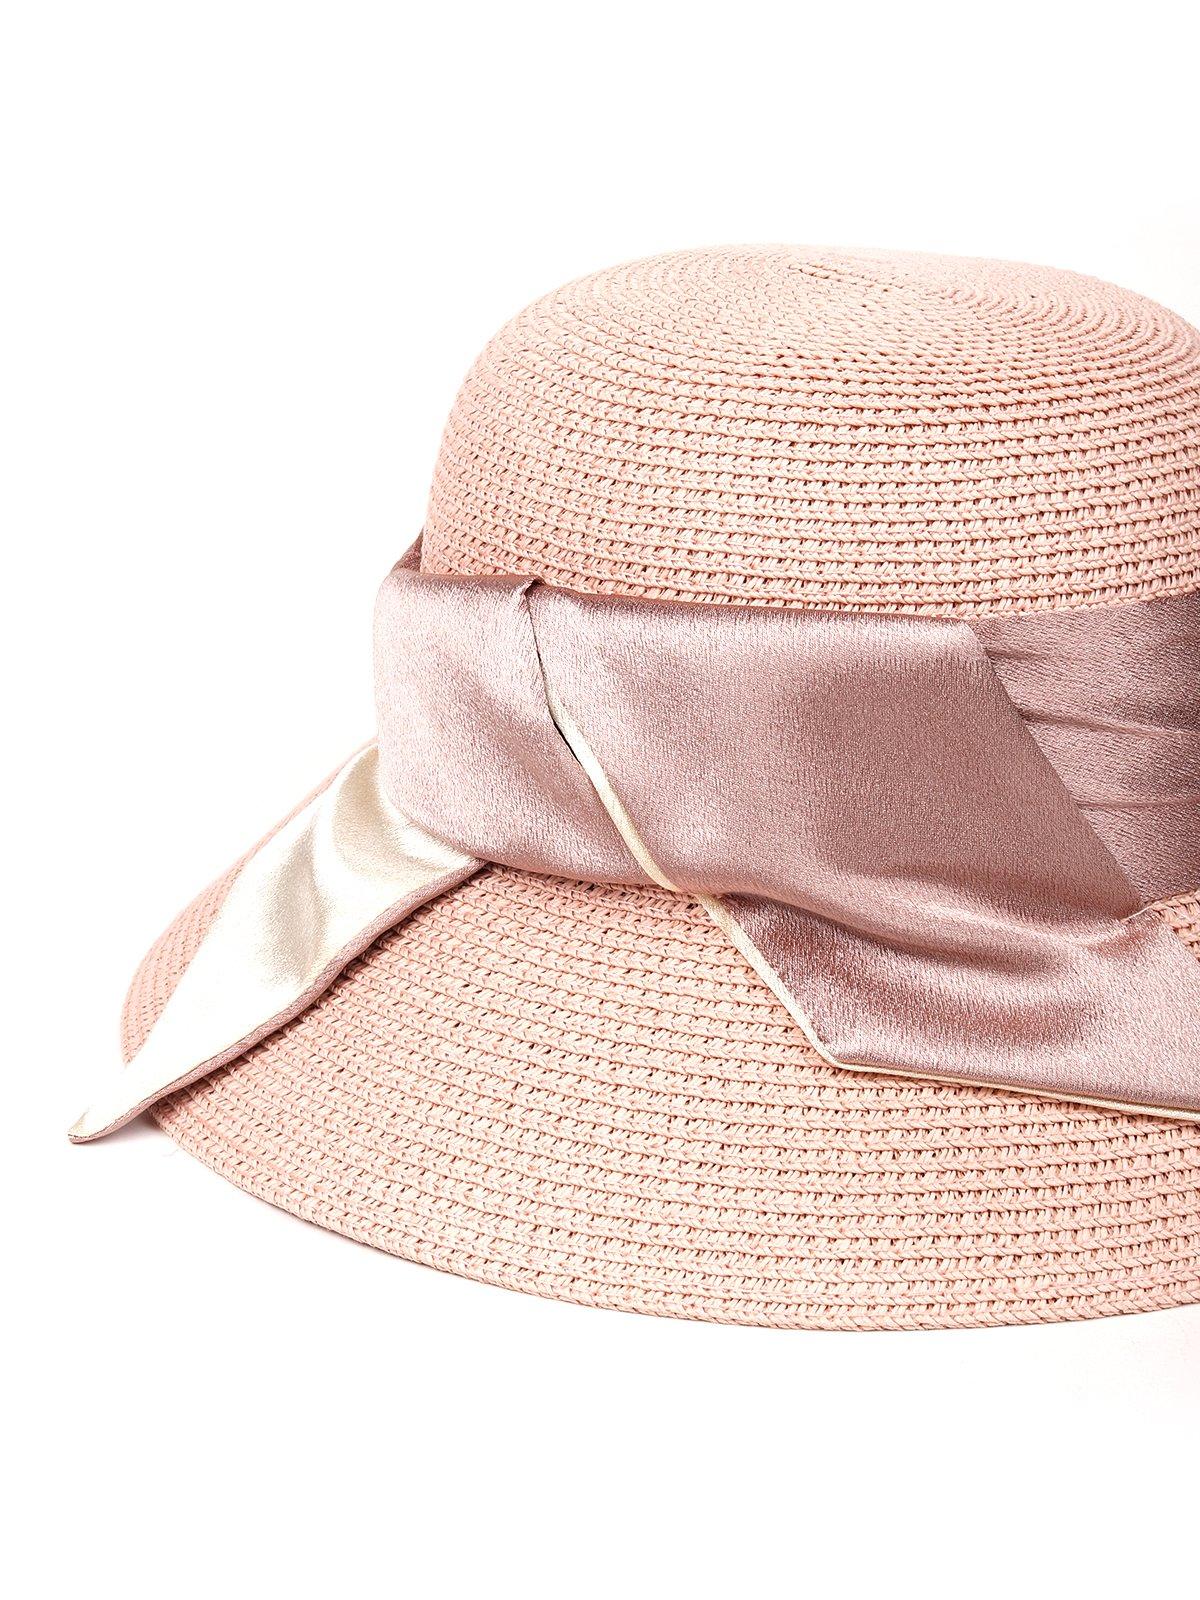 Nude Crocheted Hat With Champagne Silk Chiffon Scarf Tie - Odette